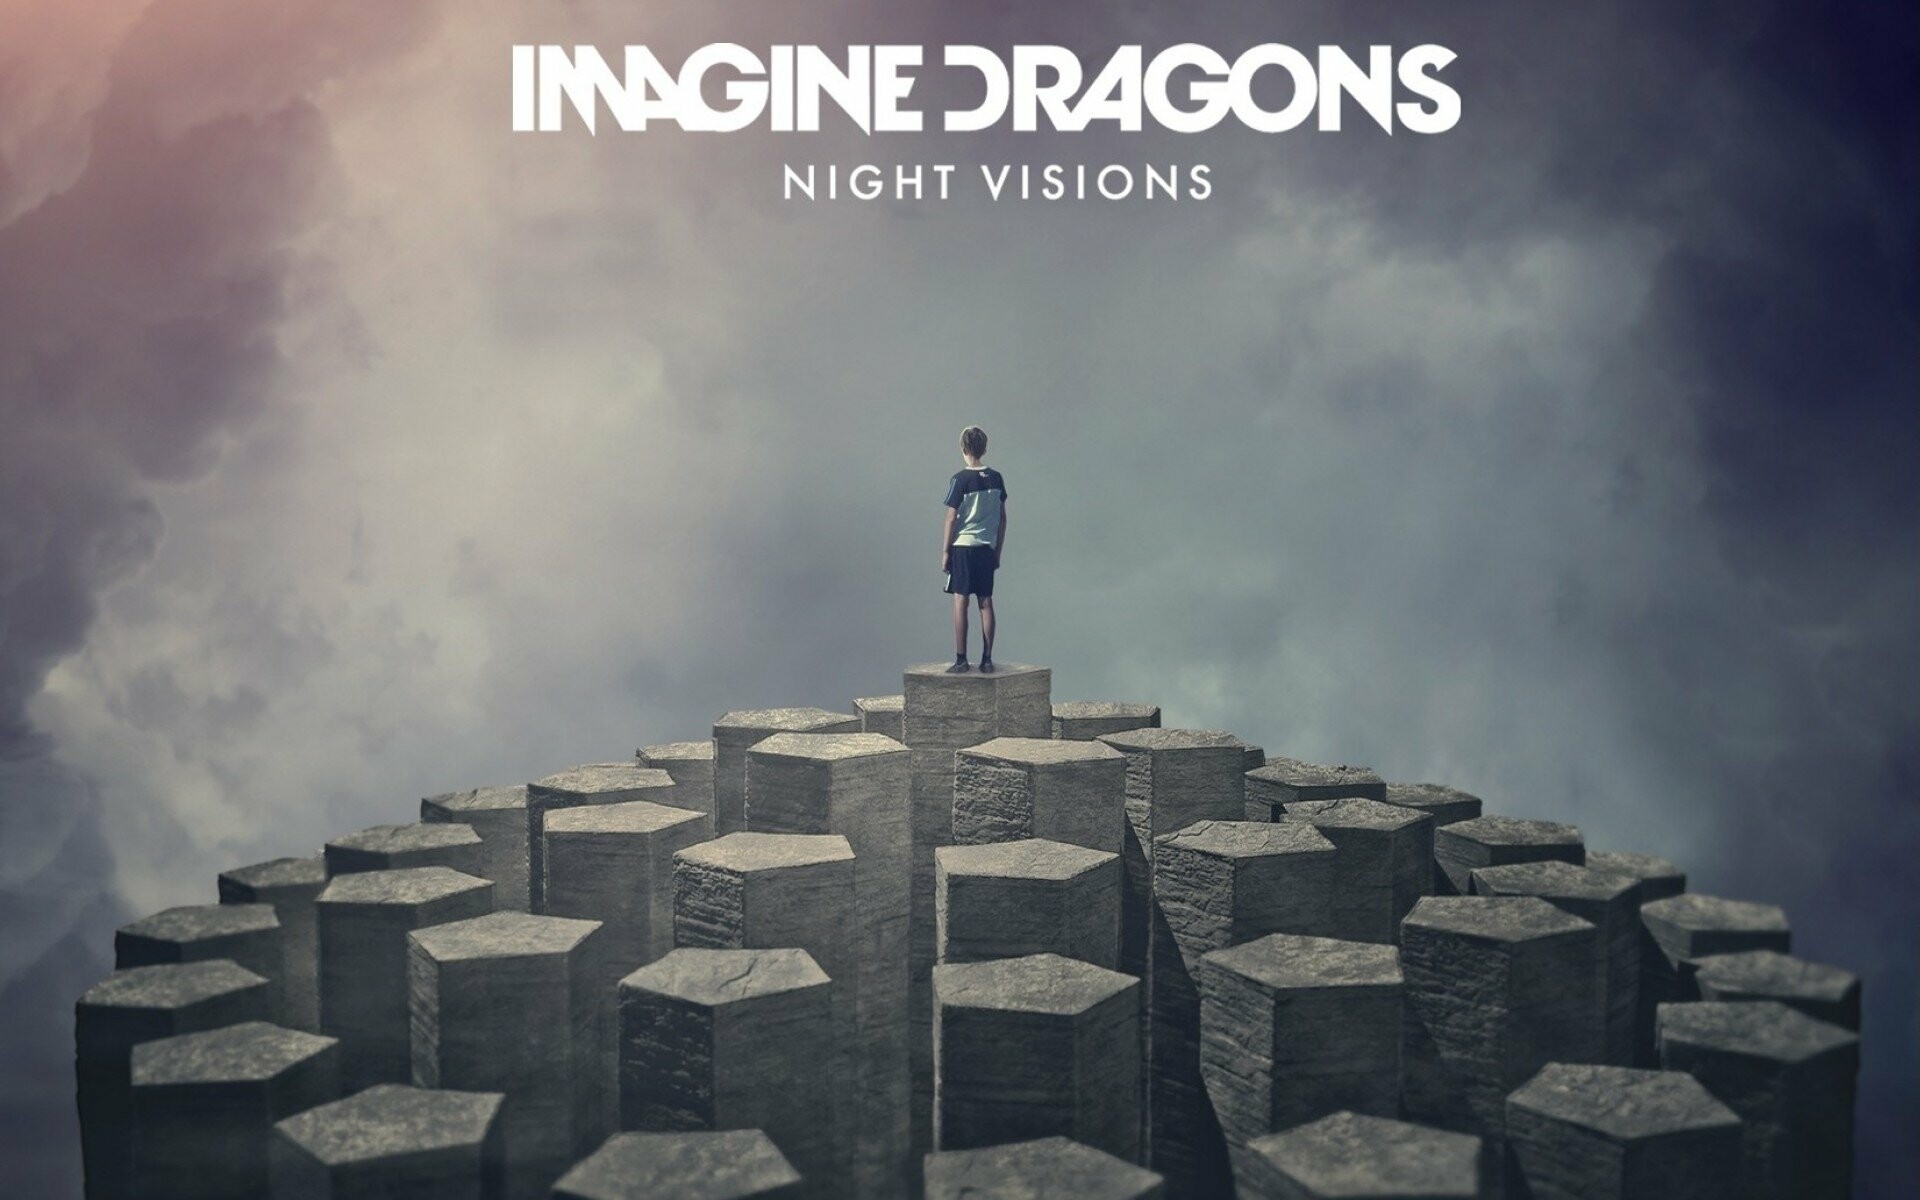 Imagine Dragons: The debut studio album, Night Visions, was released on September 4, 2012. 1920x1200 HD Wallpaper.